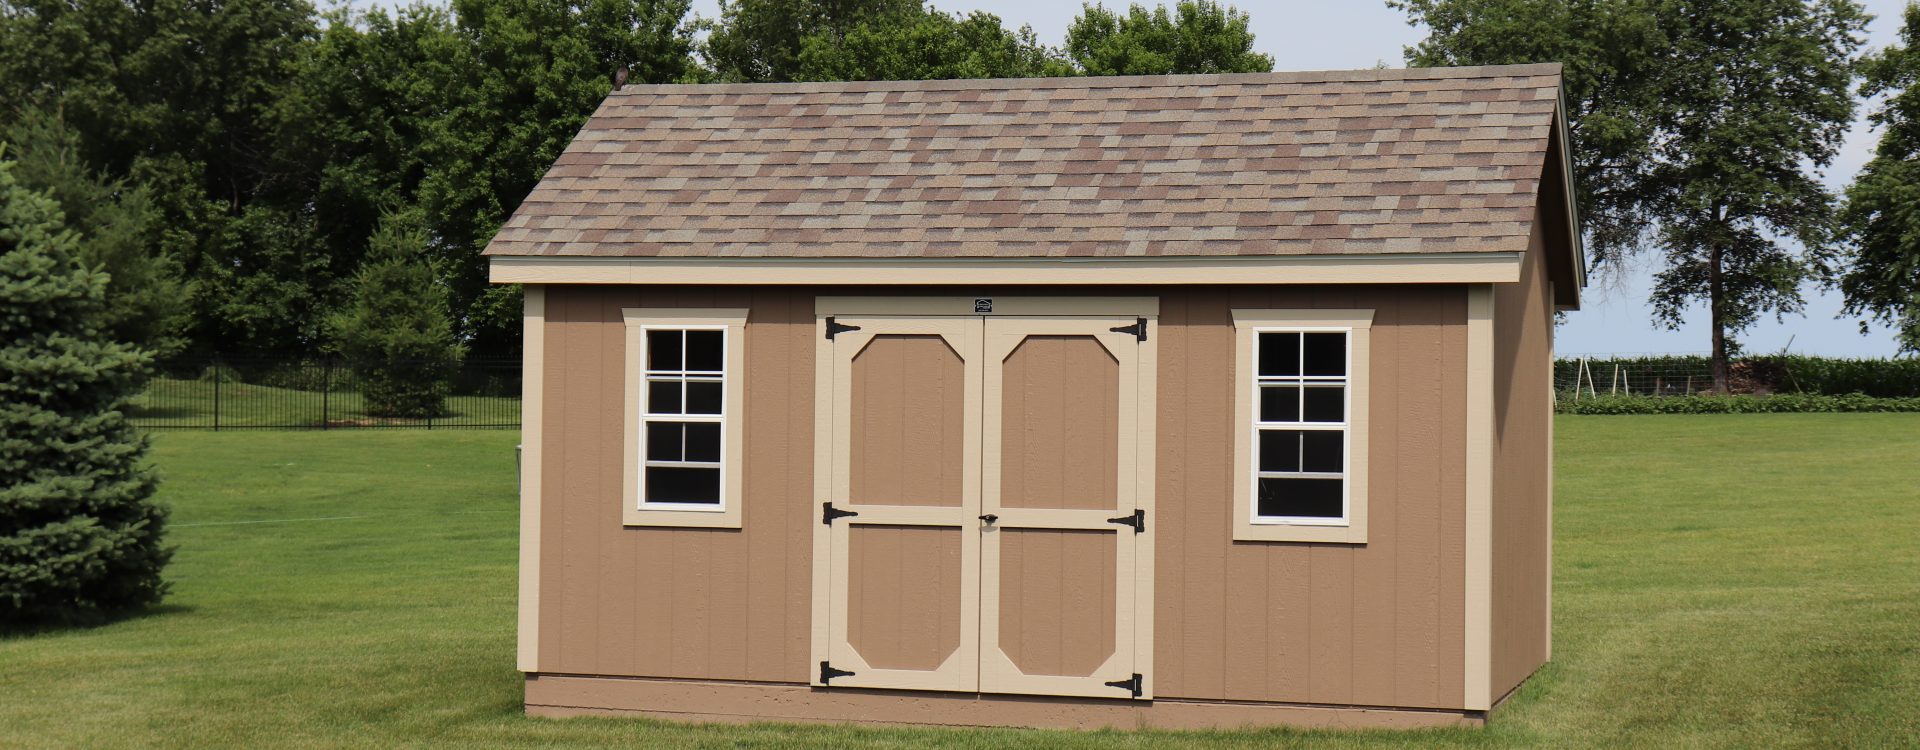 will a shed increase property value in yard